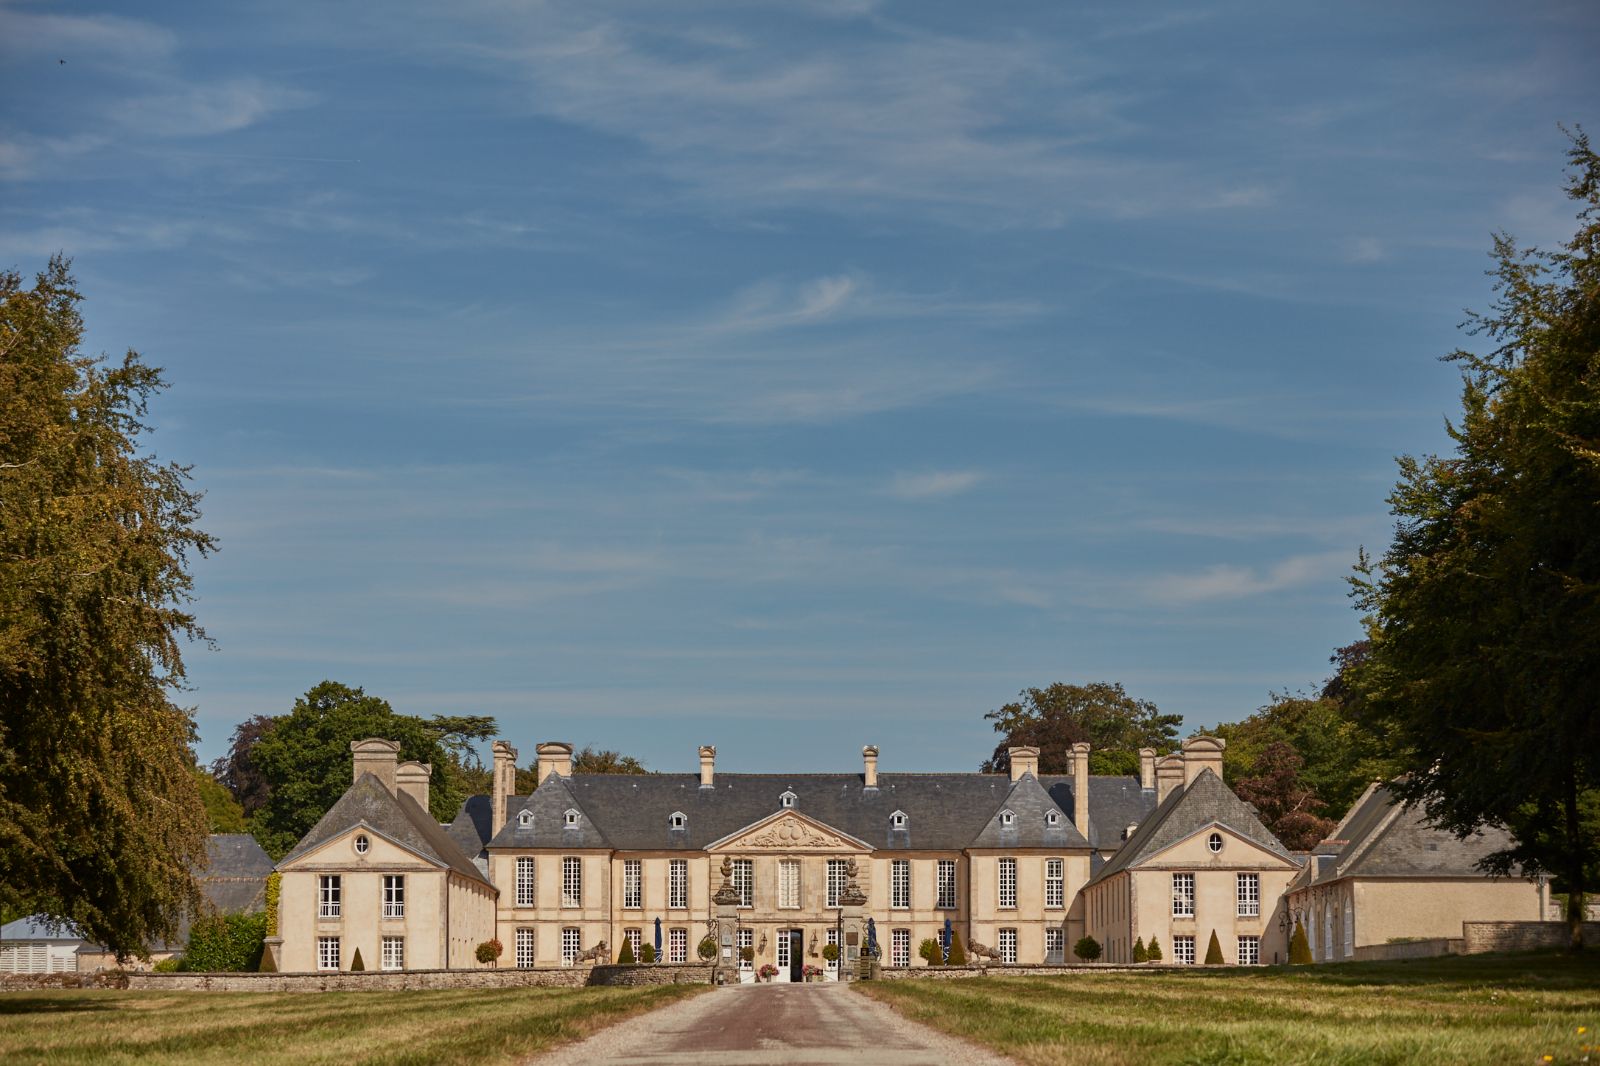 Driveway and exterior of Chateau d'Audrieu in the Normandy region of France